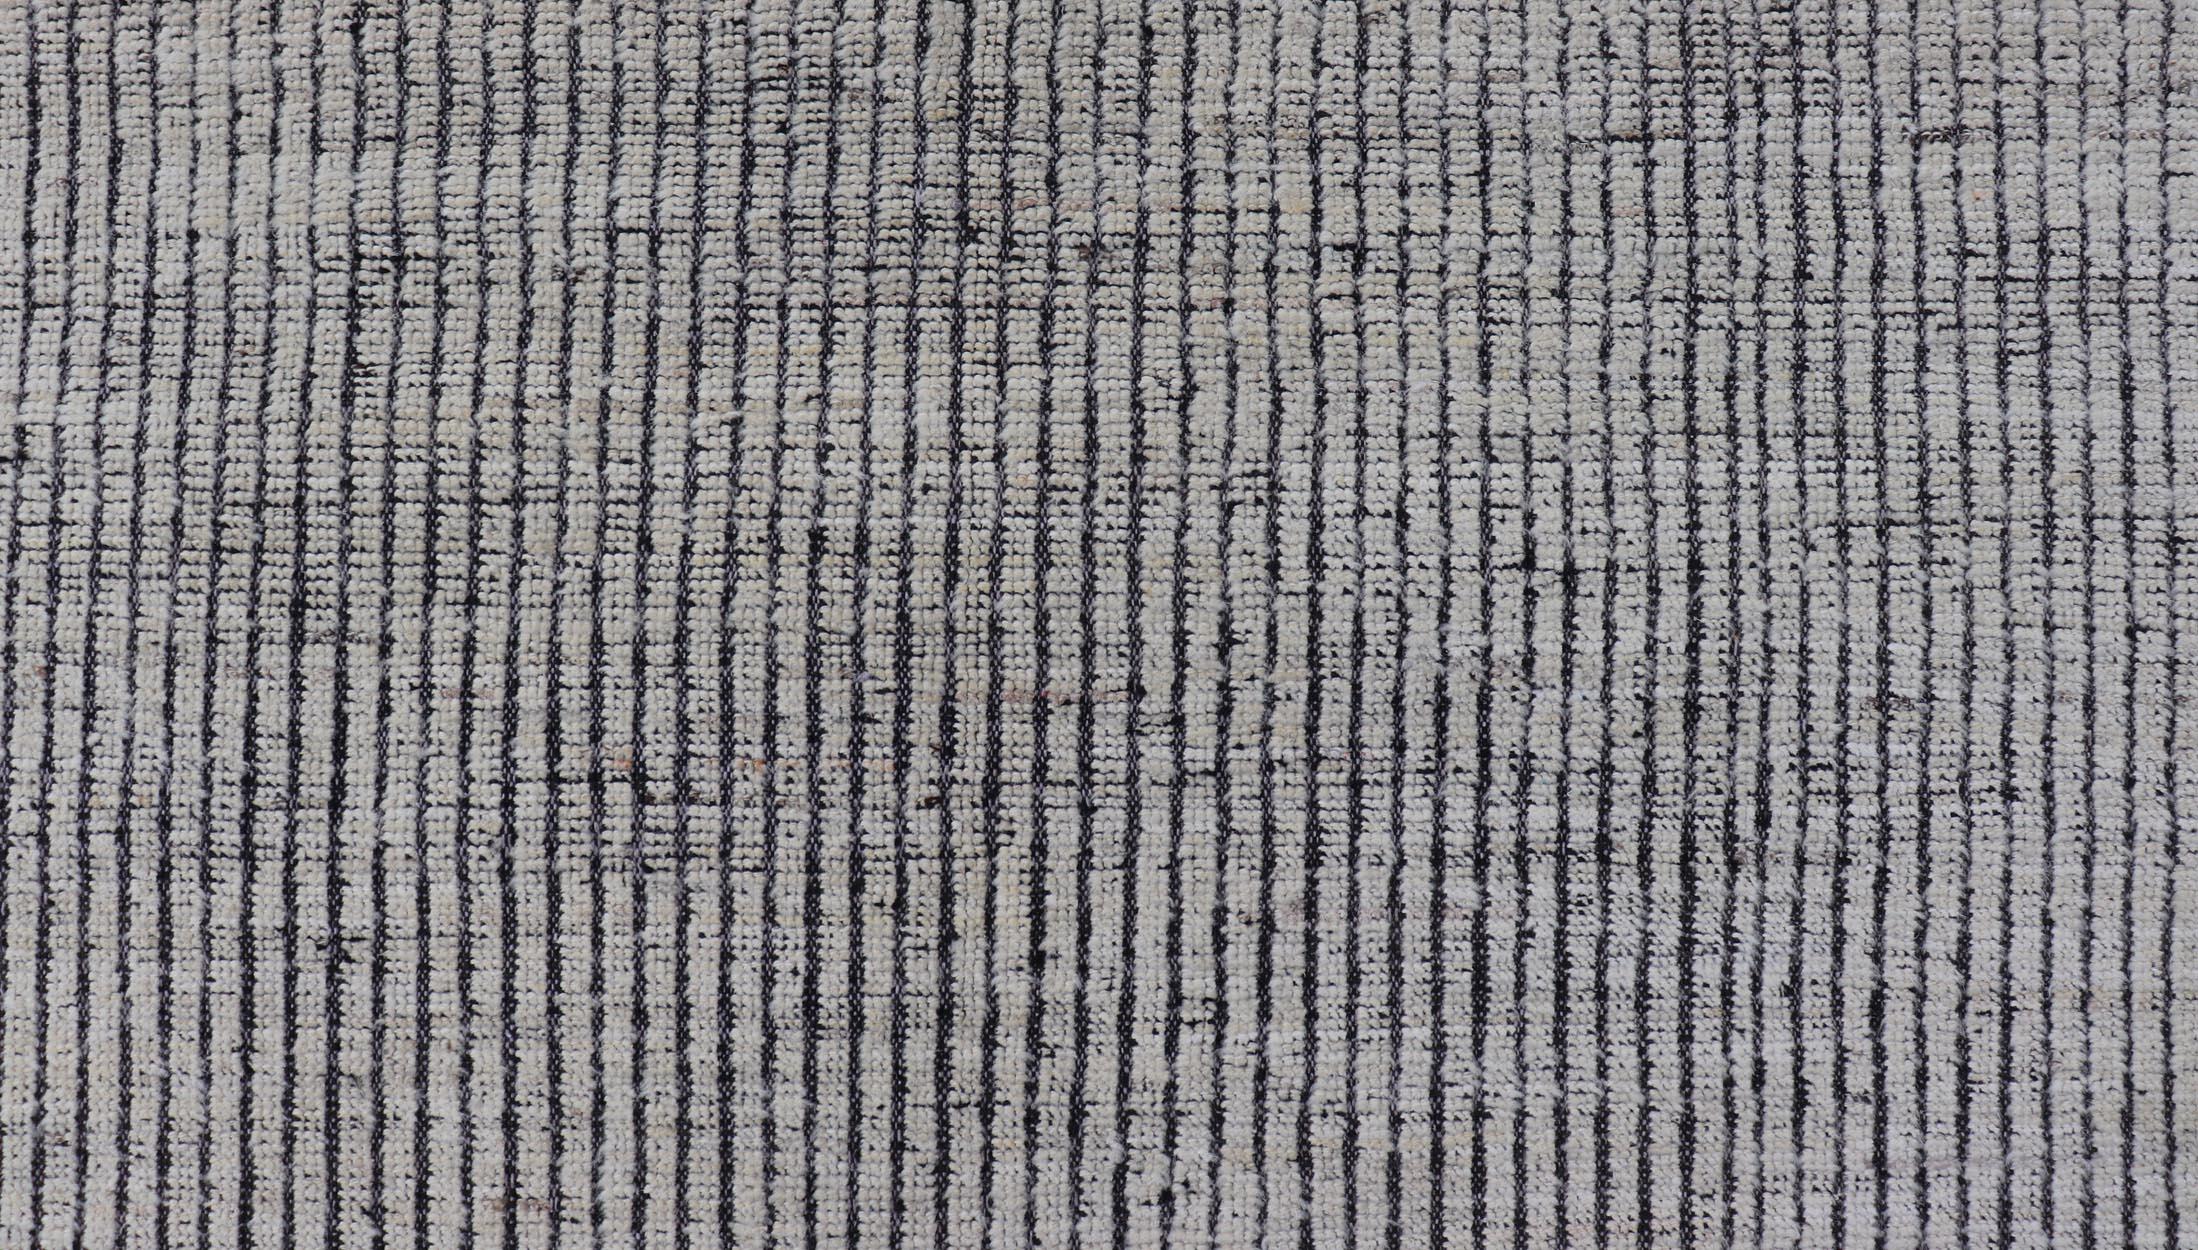 Modern Gallery Rug in White and Black background and Distressed Texture For Sale 3